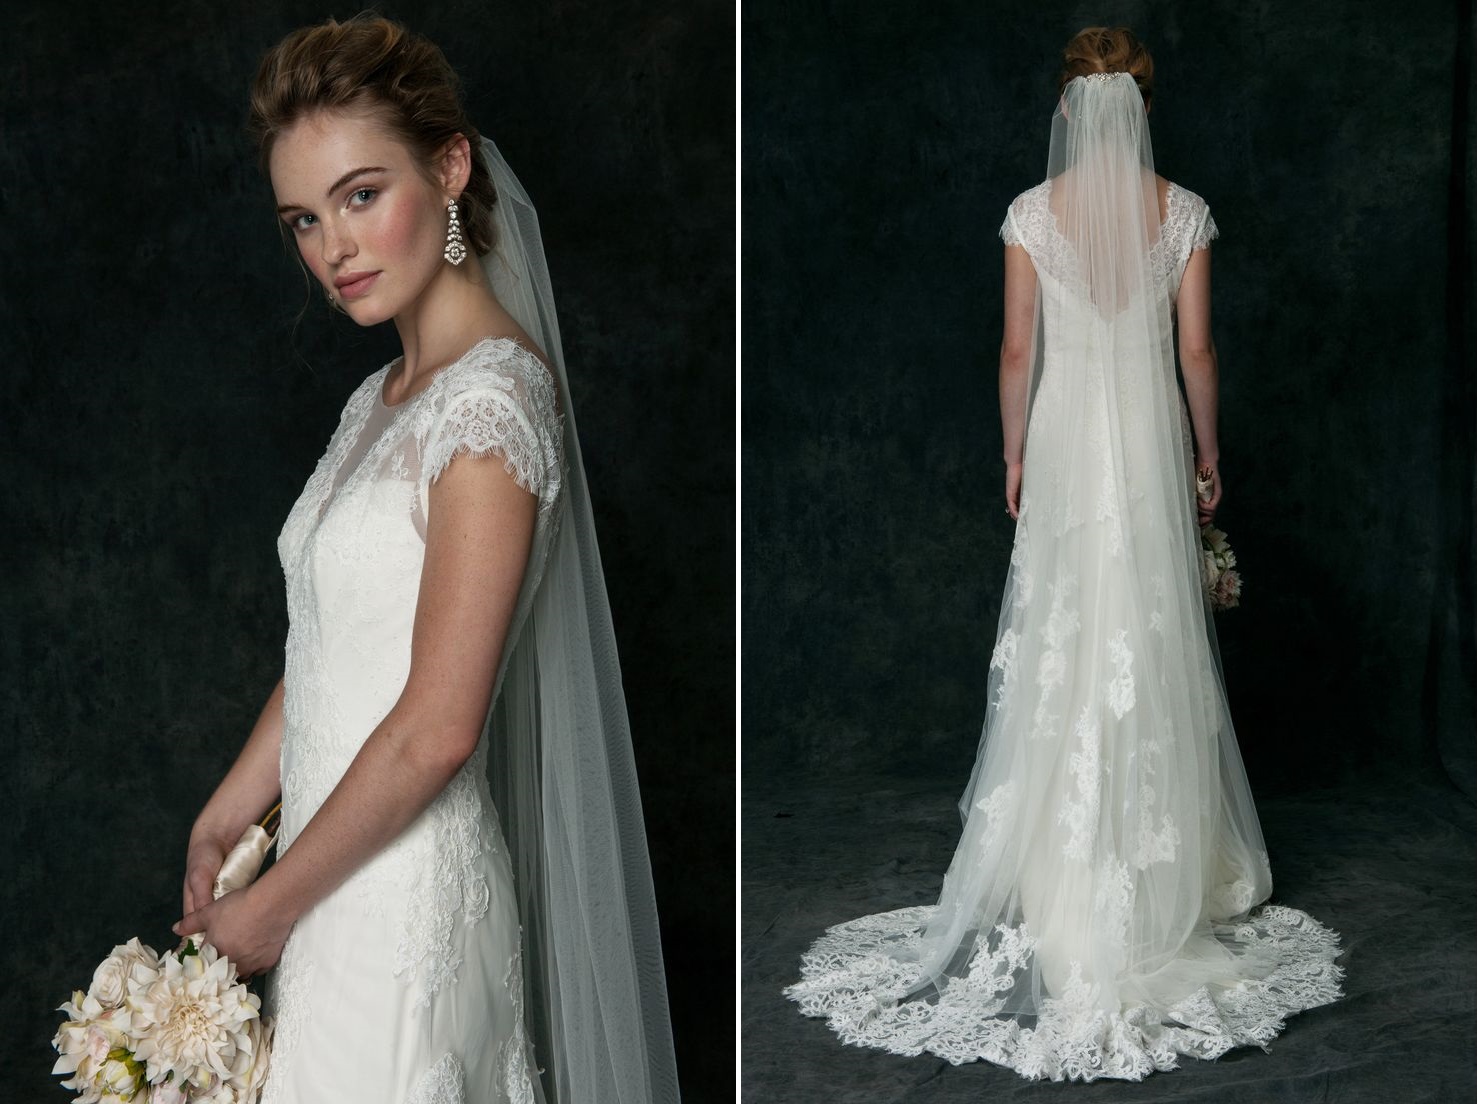 The Romantic 2016 Bridal Collection from Saja Wedding